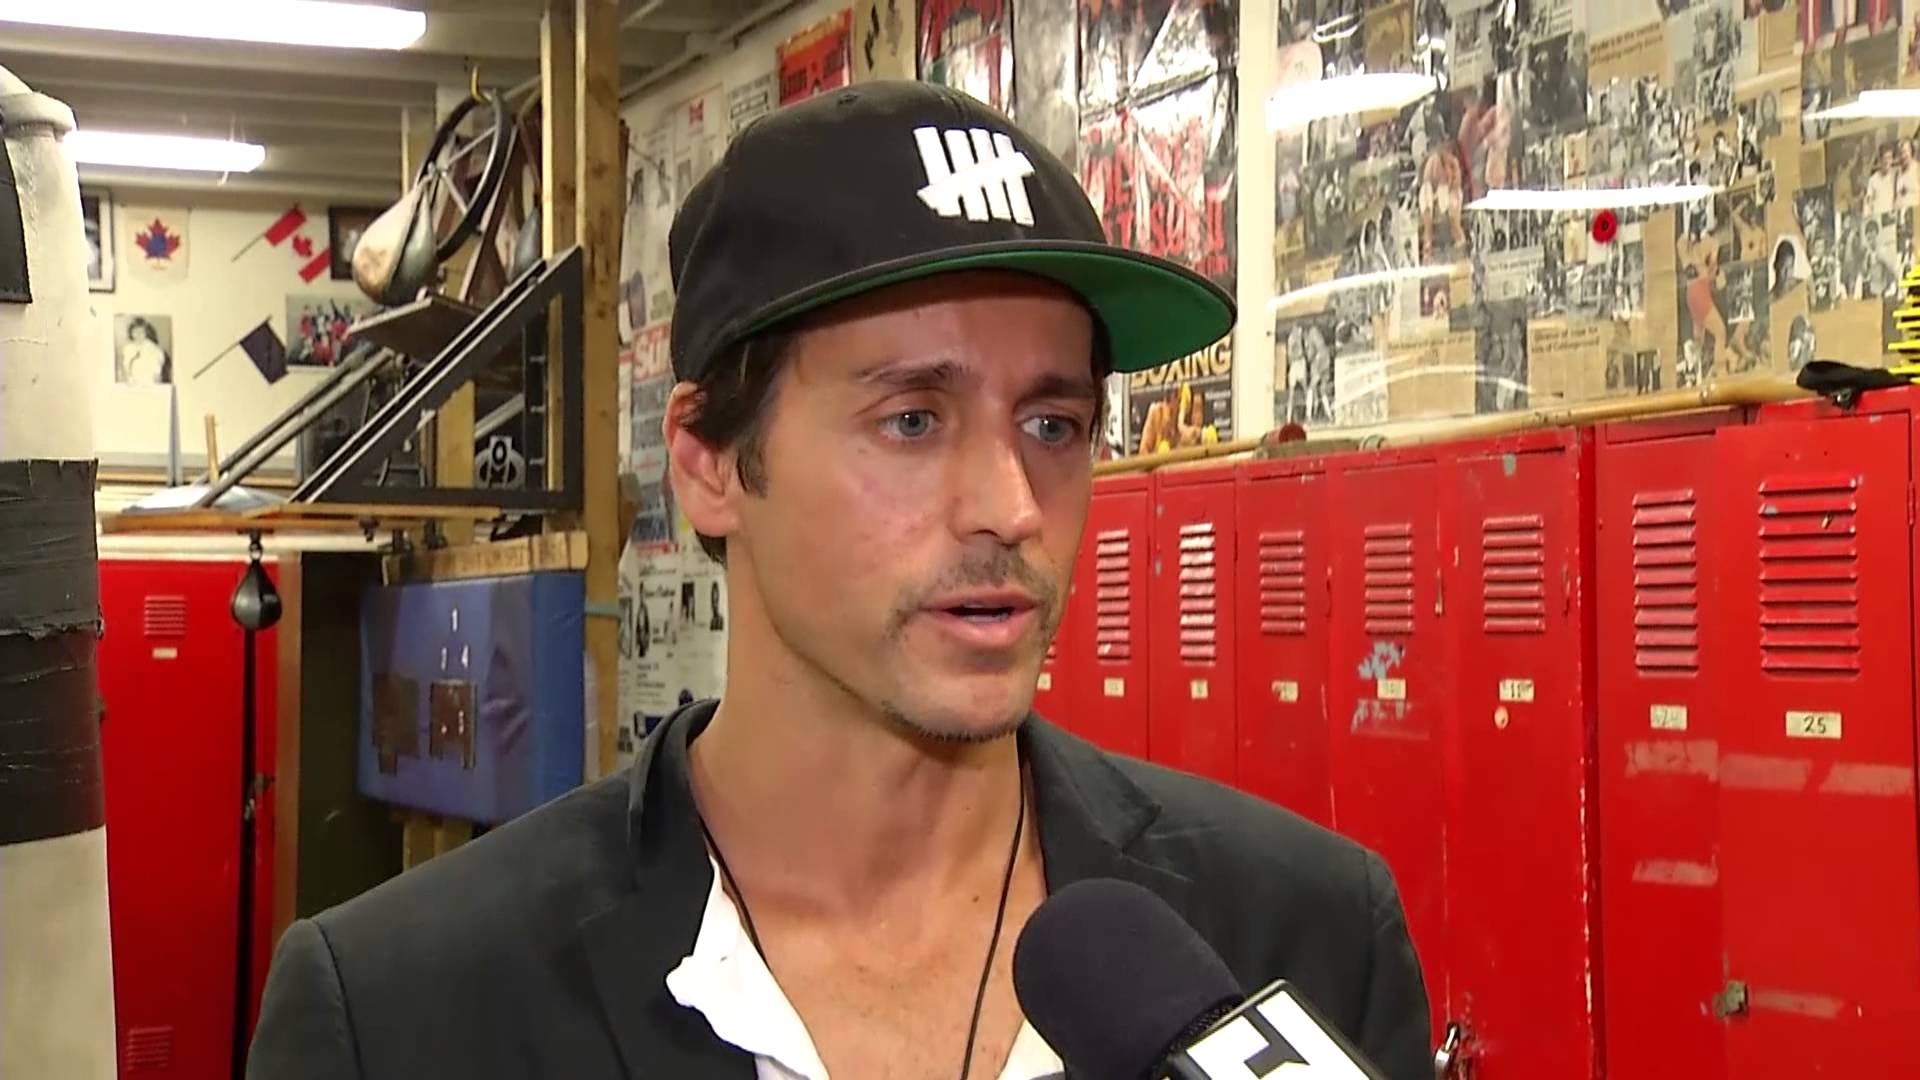 Our Lady Peace Frontman Raine Maida Makes Boxing Debut At Fight4Lif...